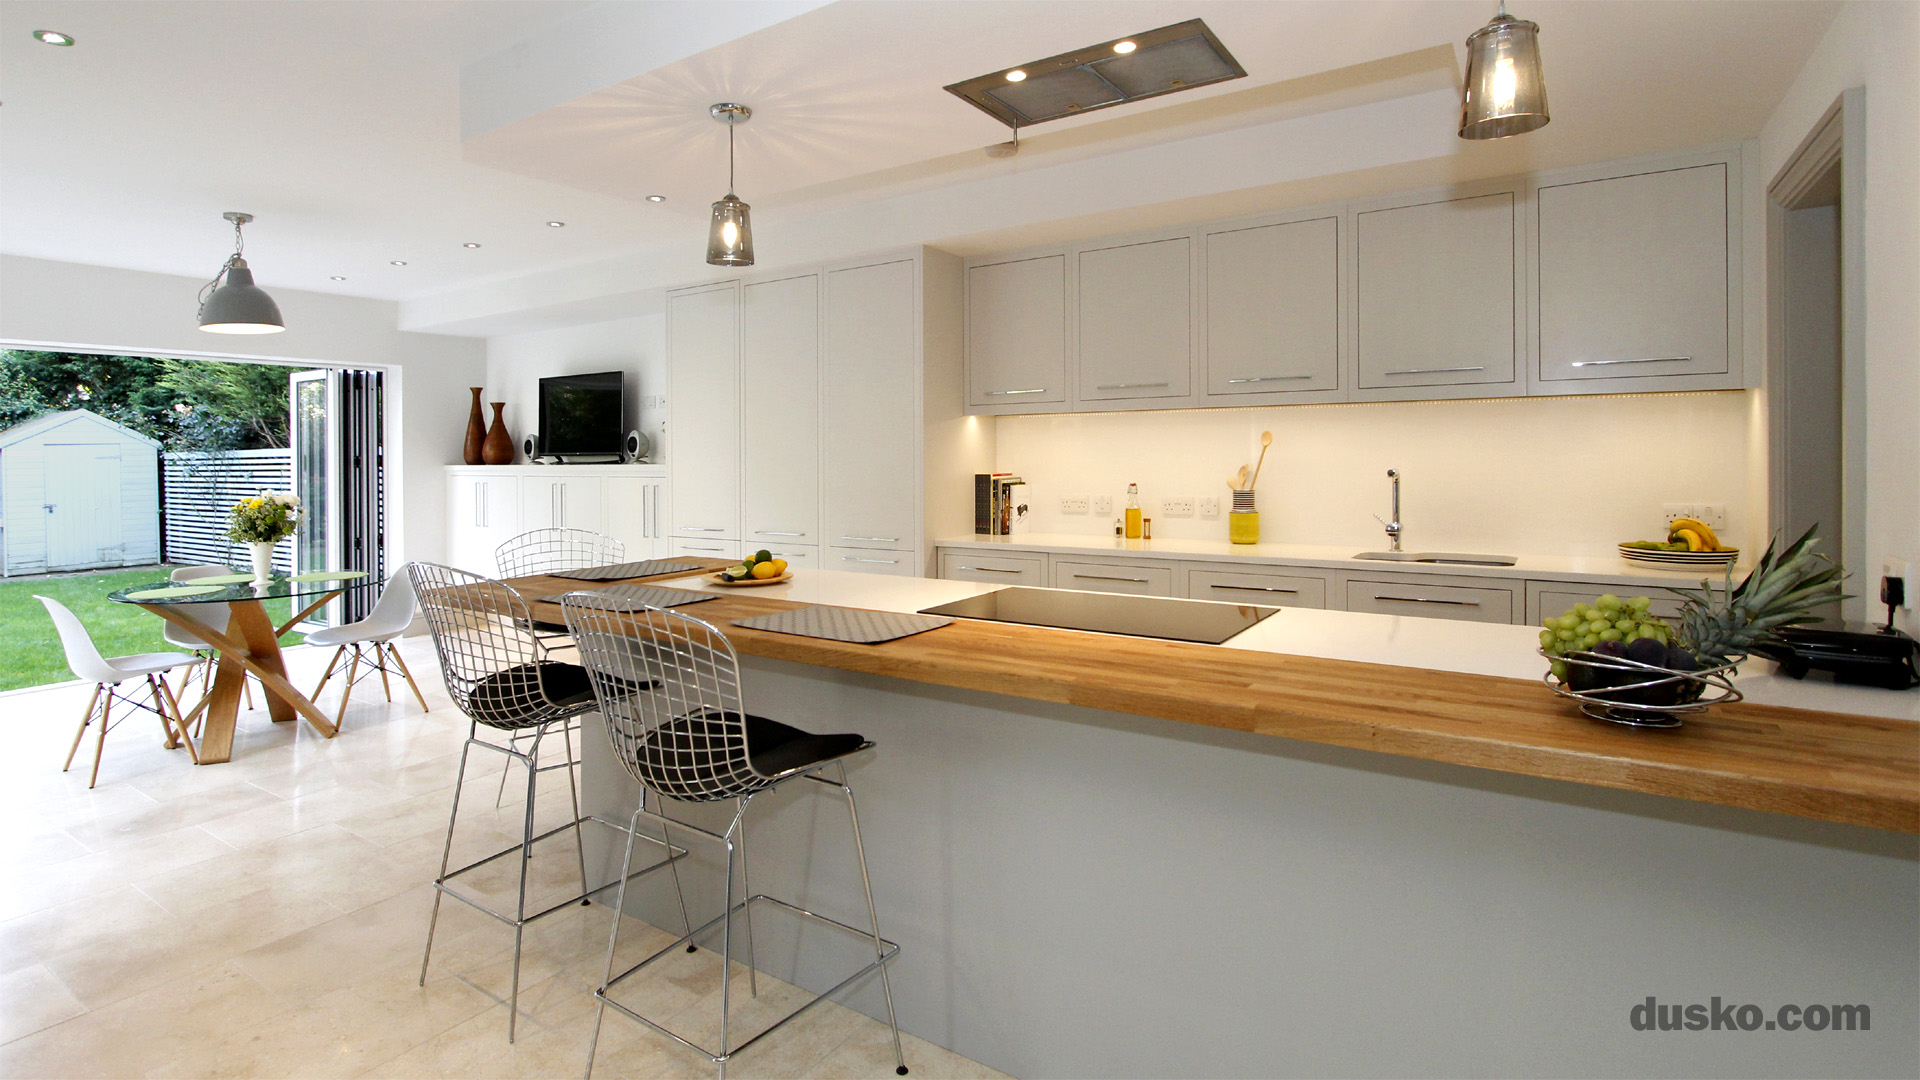 Contemporary Open Plan Kitchen and Dining Area in Handforth, Cheshire Breakfast Bar